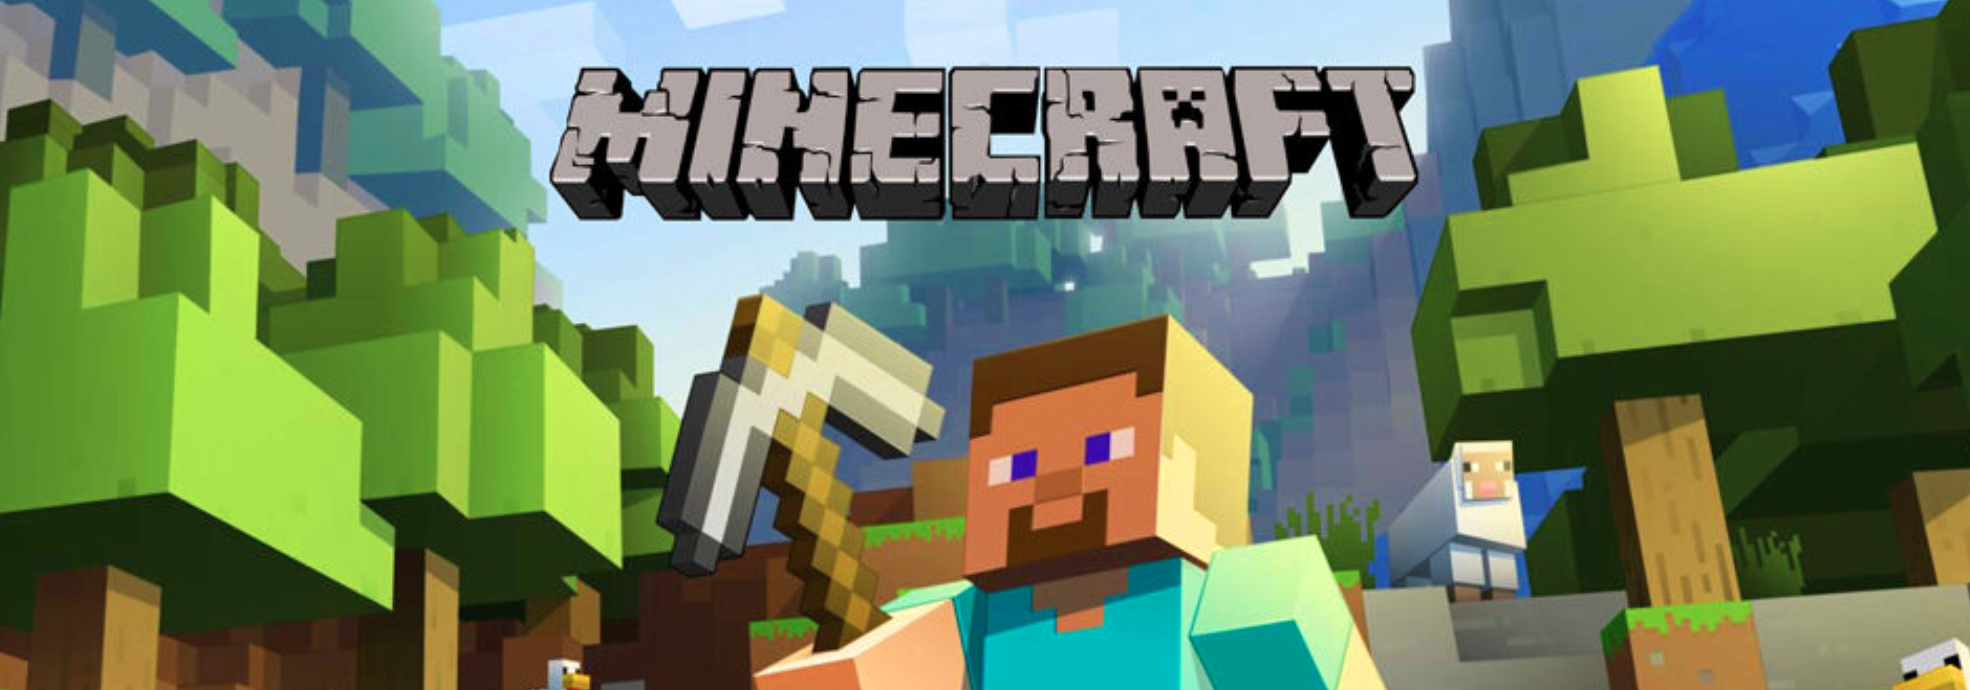 The Pixel Perfect Title of Minecraft